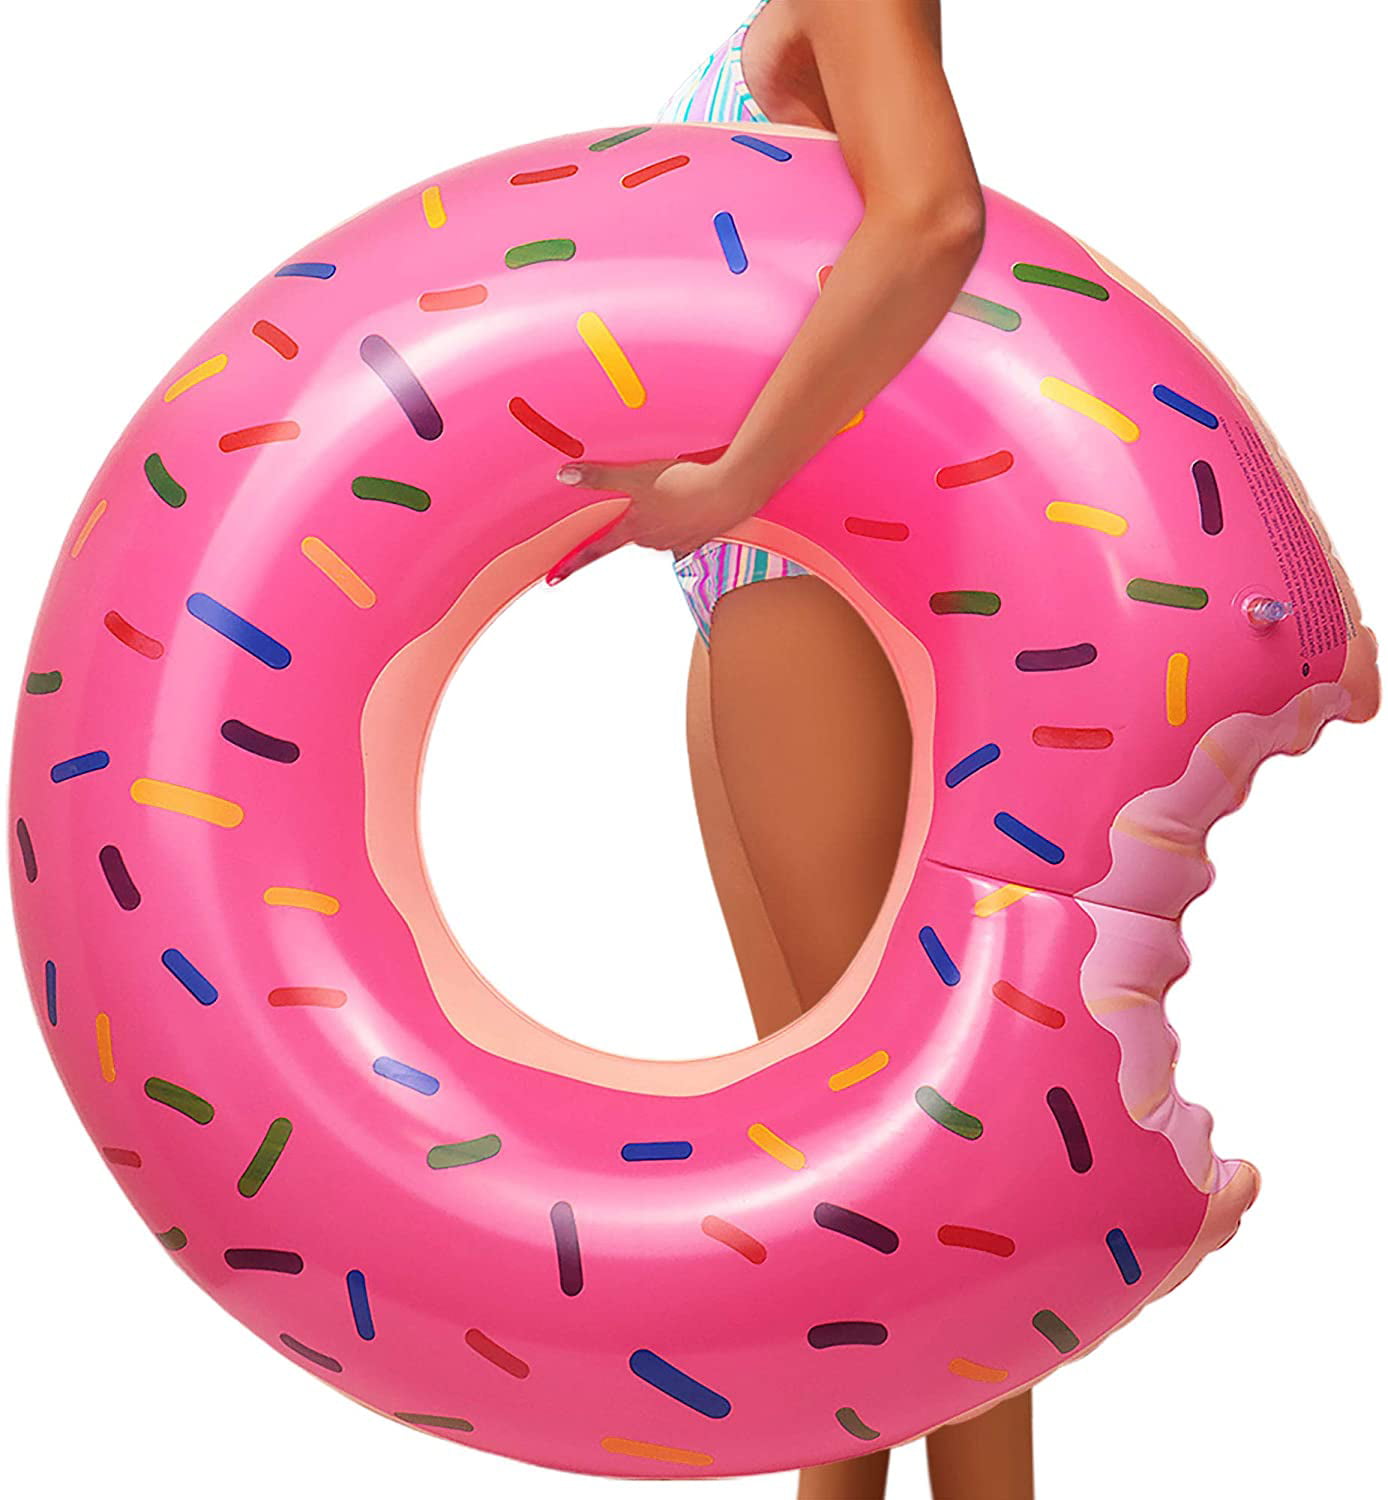 Donut Pool Float Inflatable Chocolate Strawberry Swim Rings for Kids Adults 